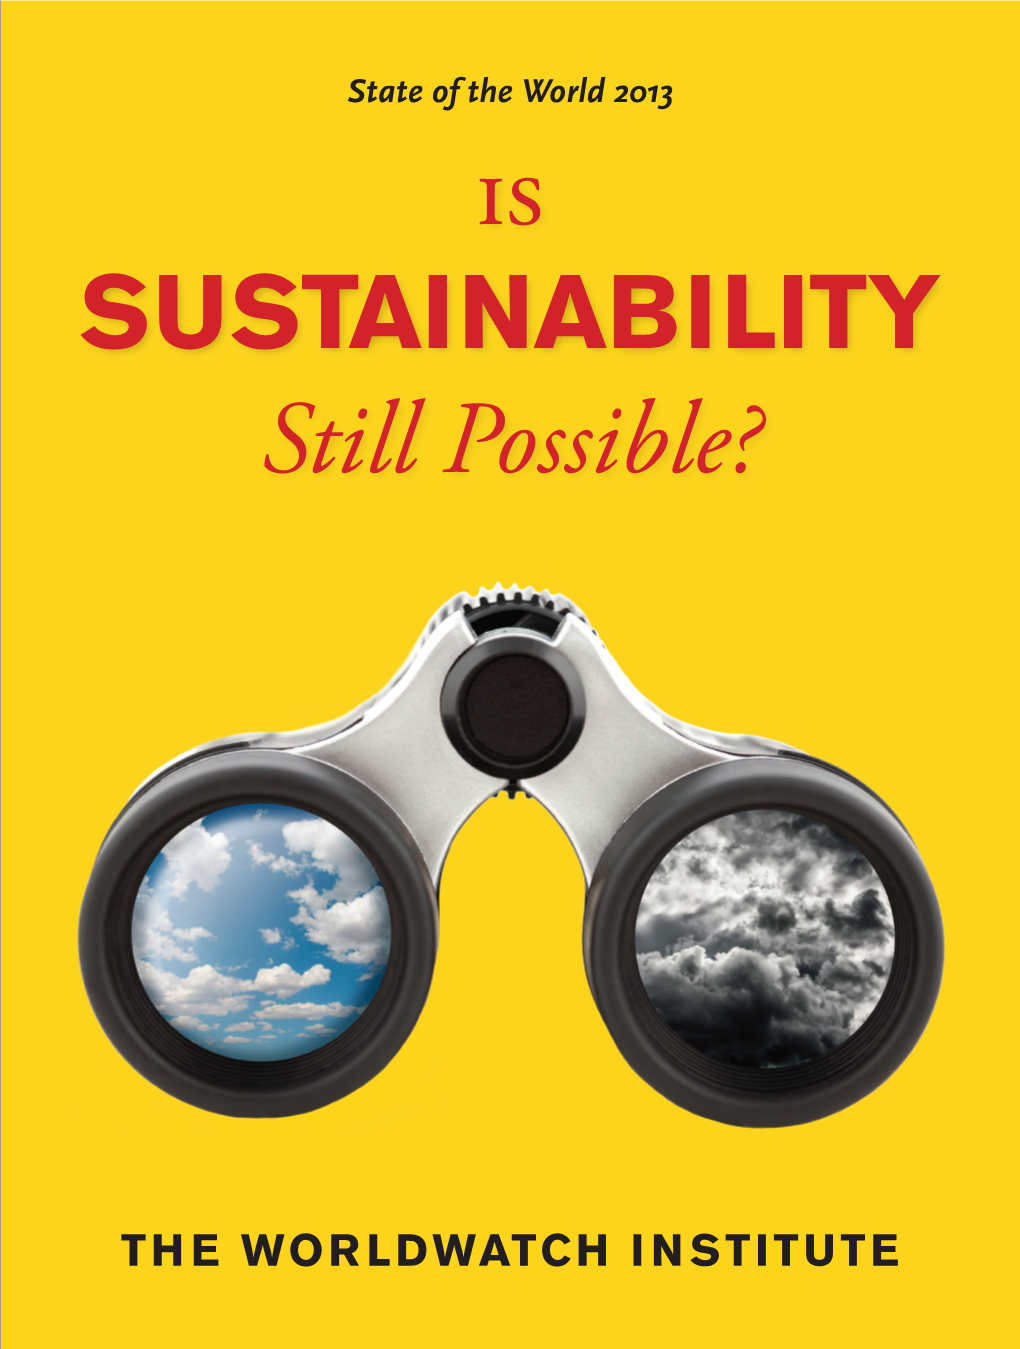 Is SUSTAINABILITY Still Possible?